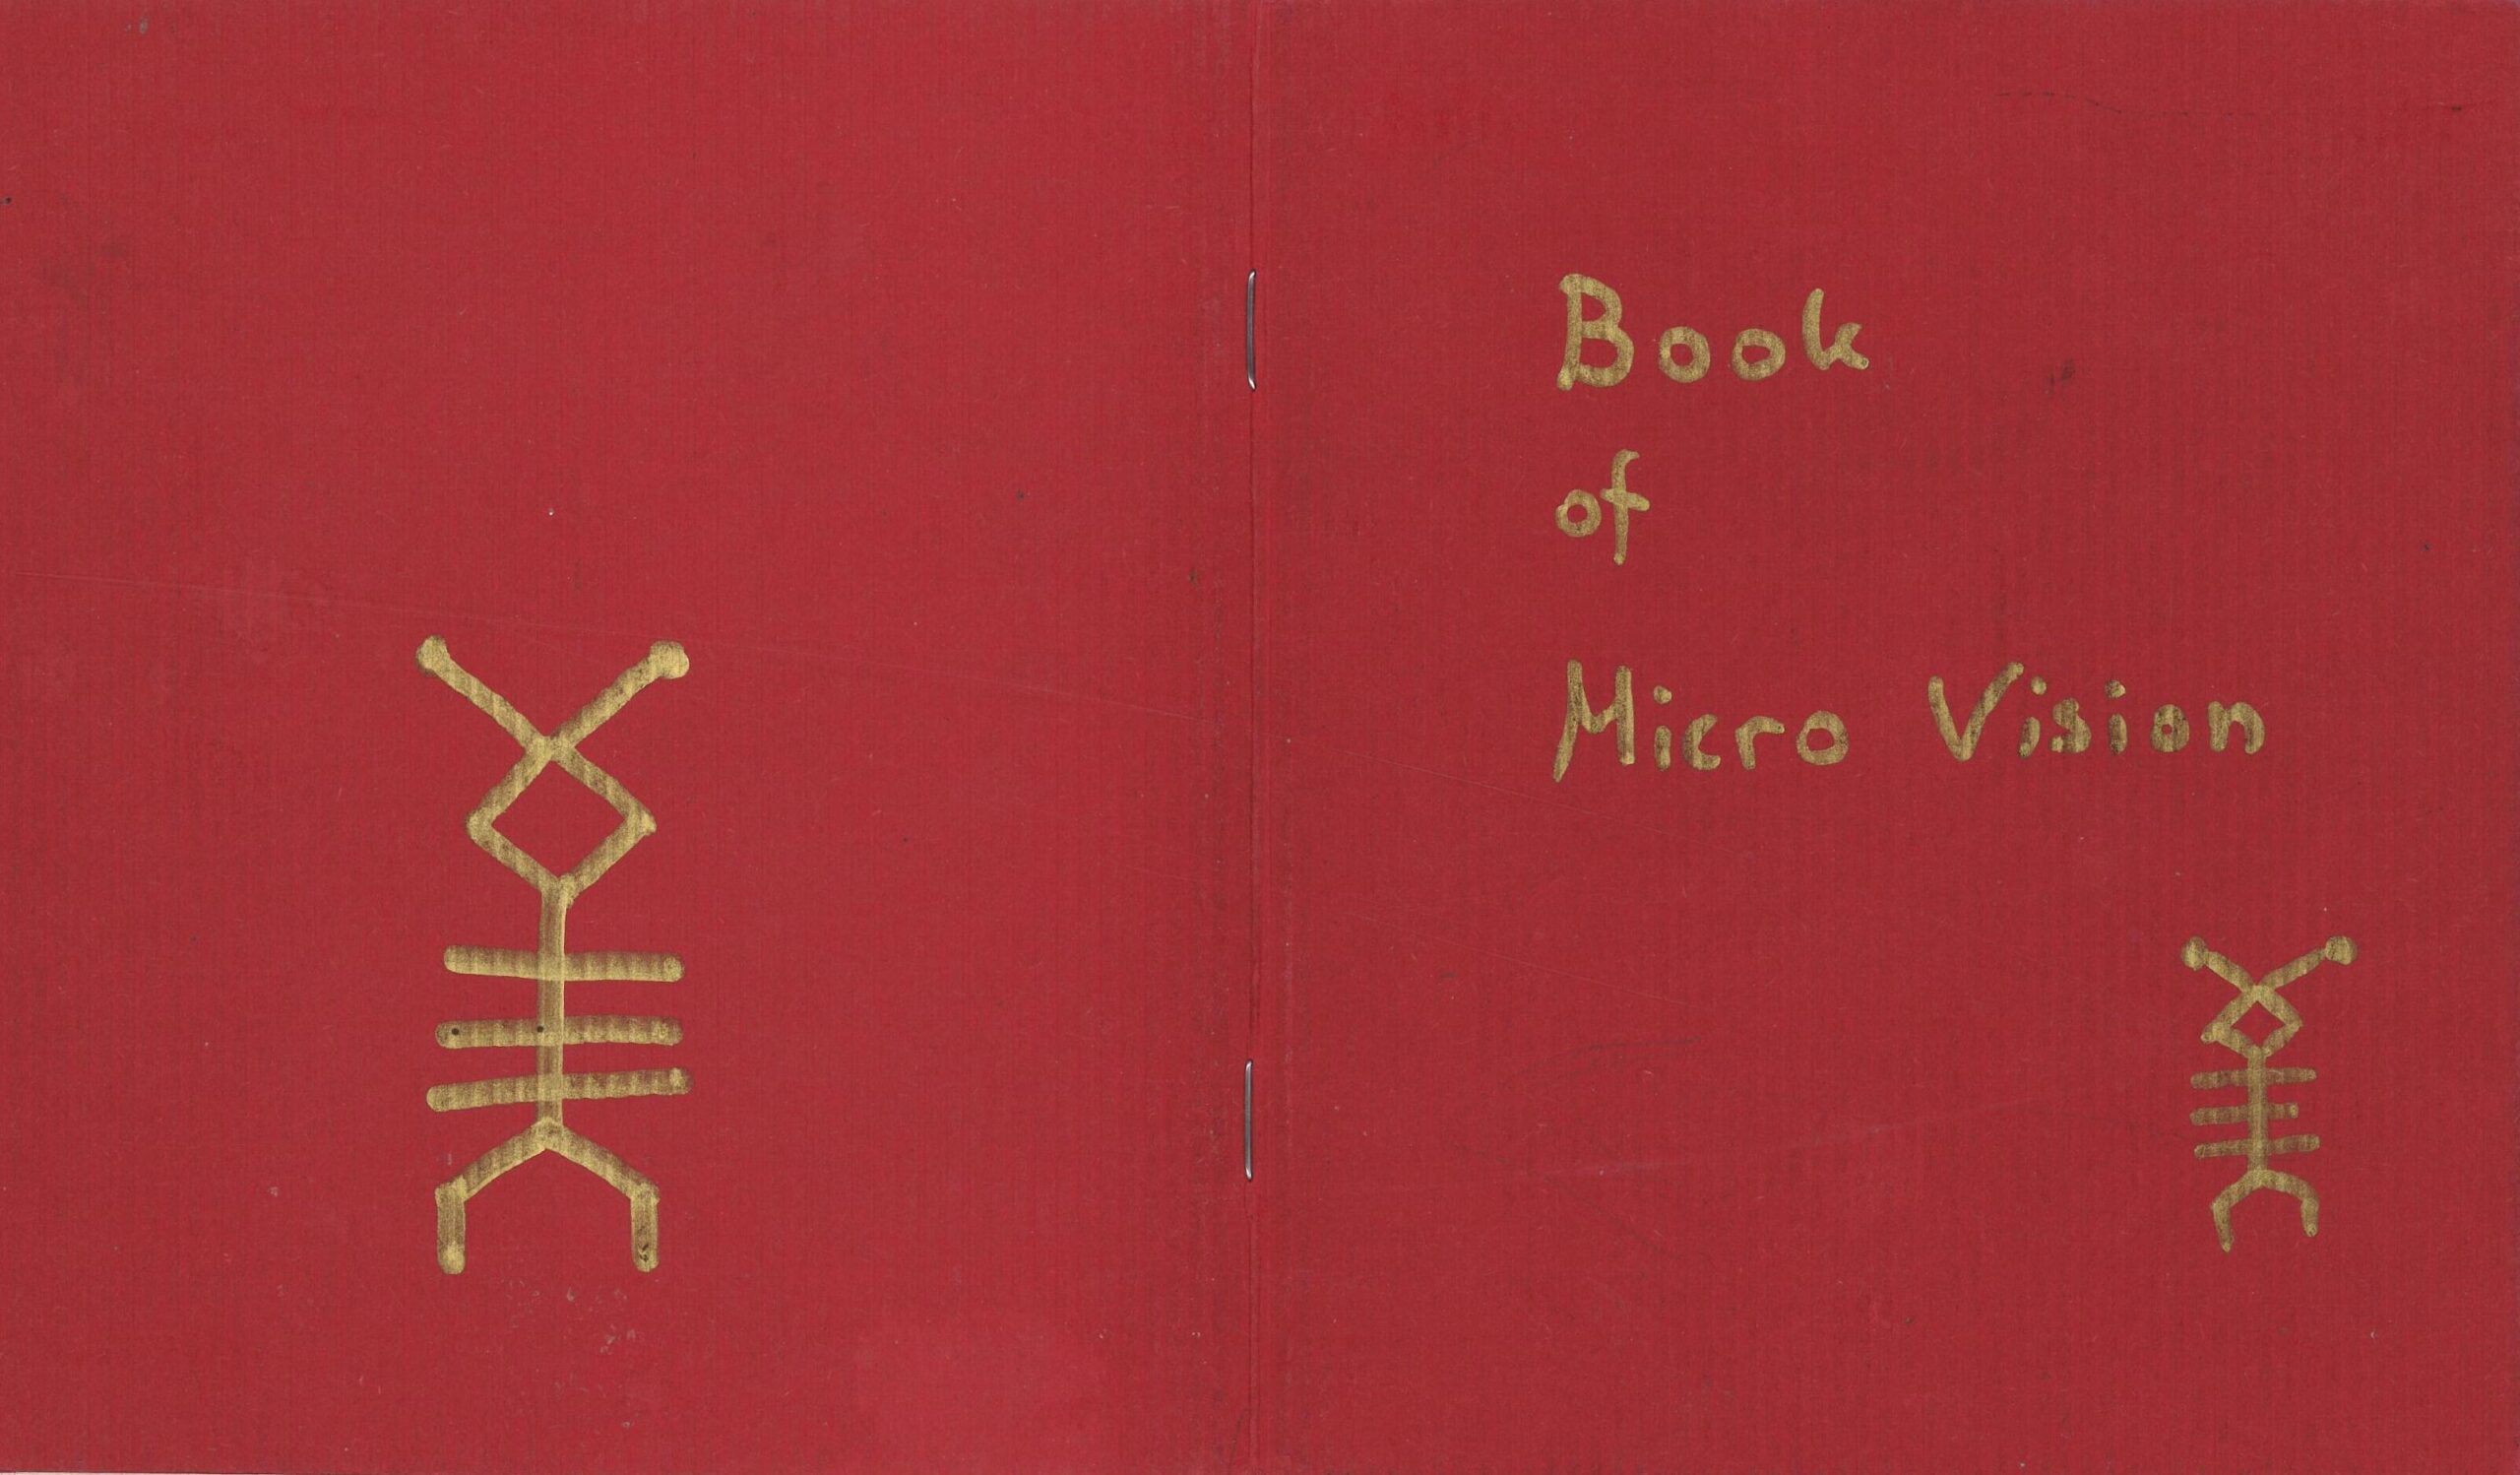 The Book of Micro Vision